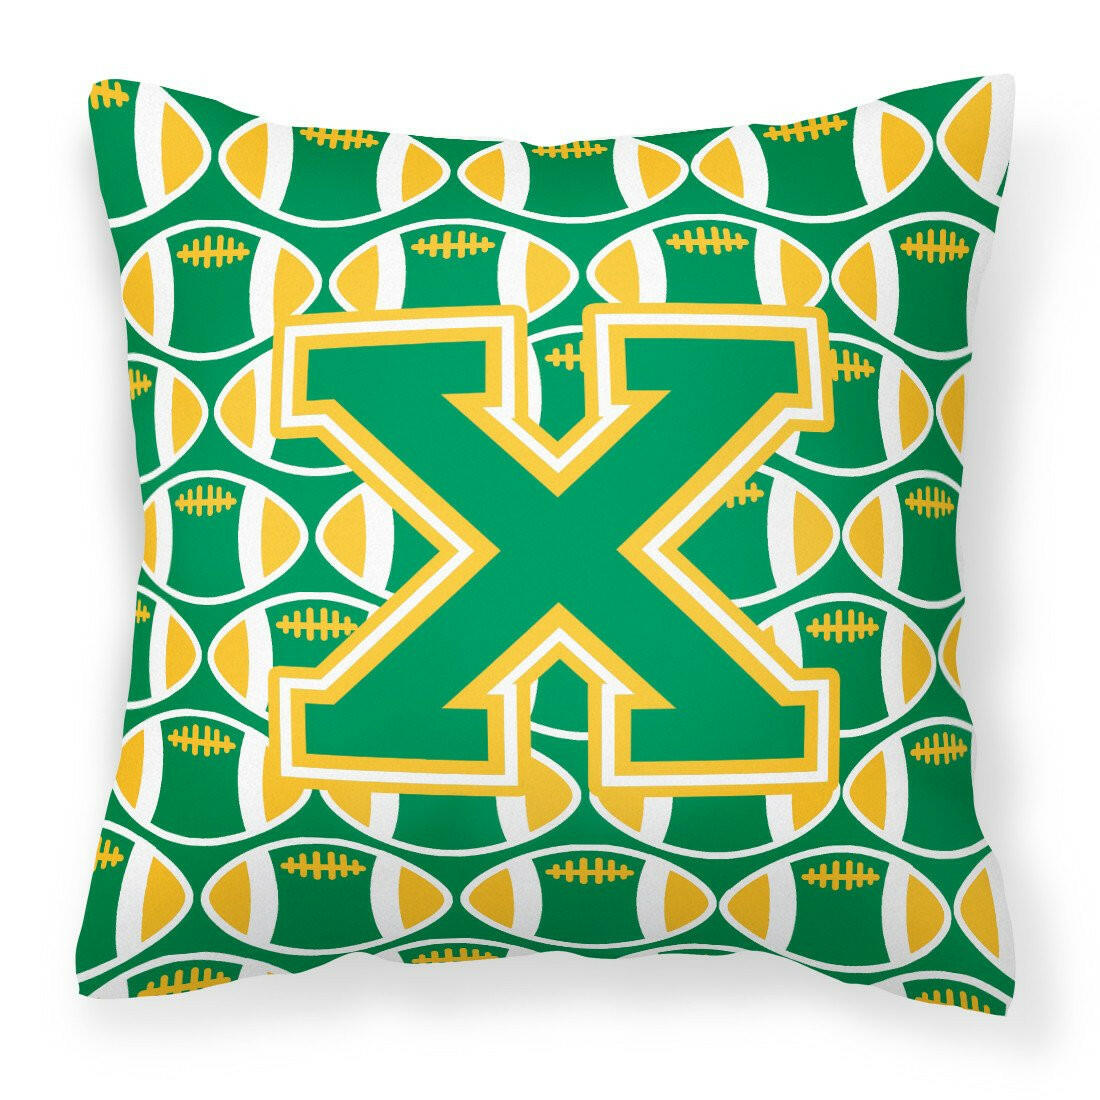 Letter X Football Green and Gold Fabric Decorative Pillow CJ1069-XPW1414 by Caroline's Treasures